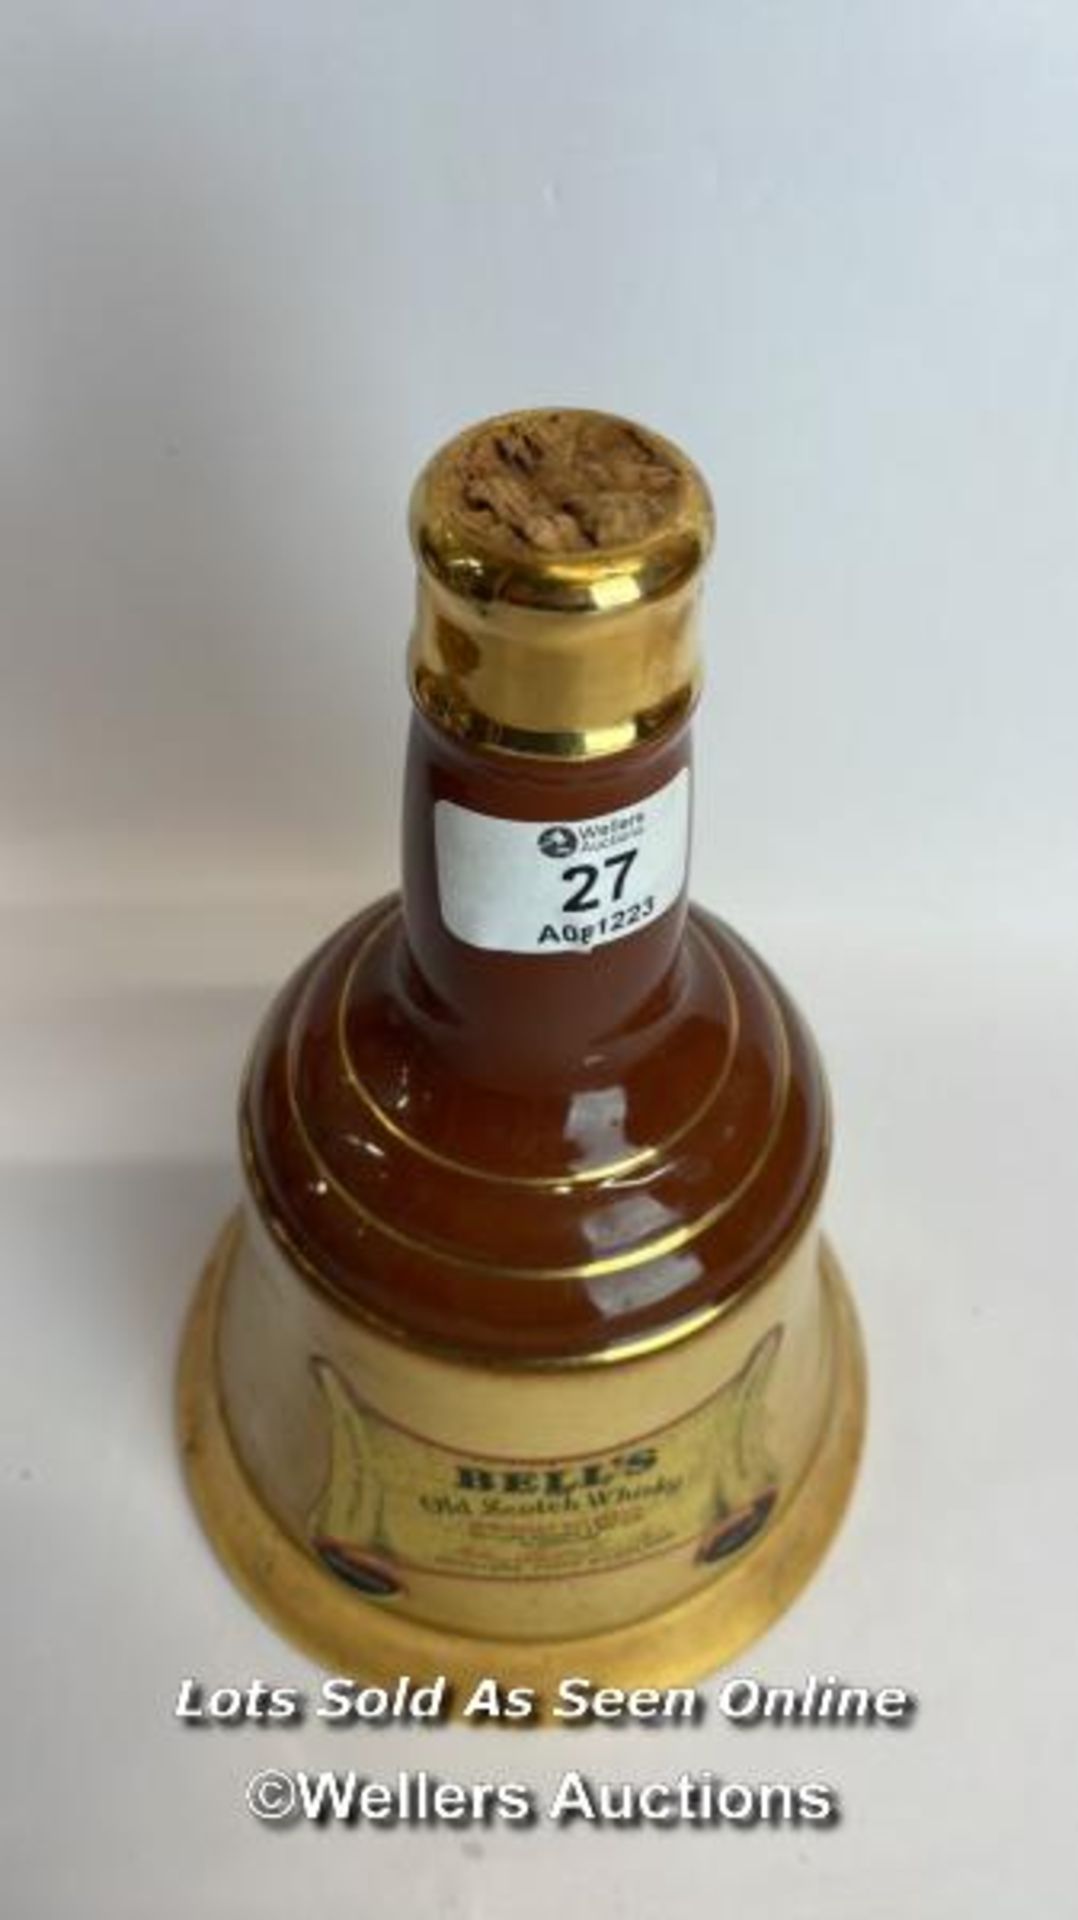 Bell's Specially Selected Blended Scotch Whisky, Bottle made by Wade, 26.5 OZ, 40% vol / Please - Image 9 of 10